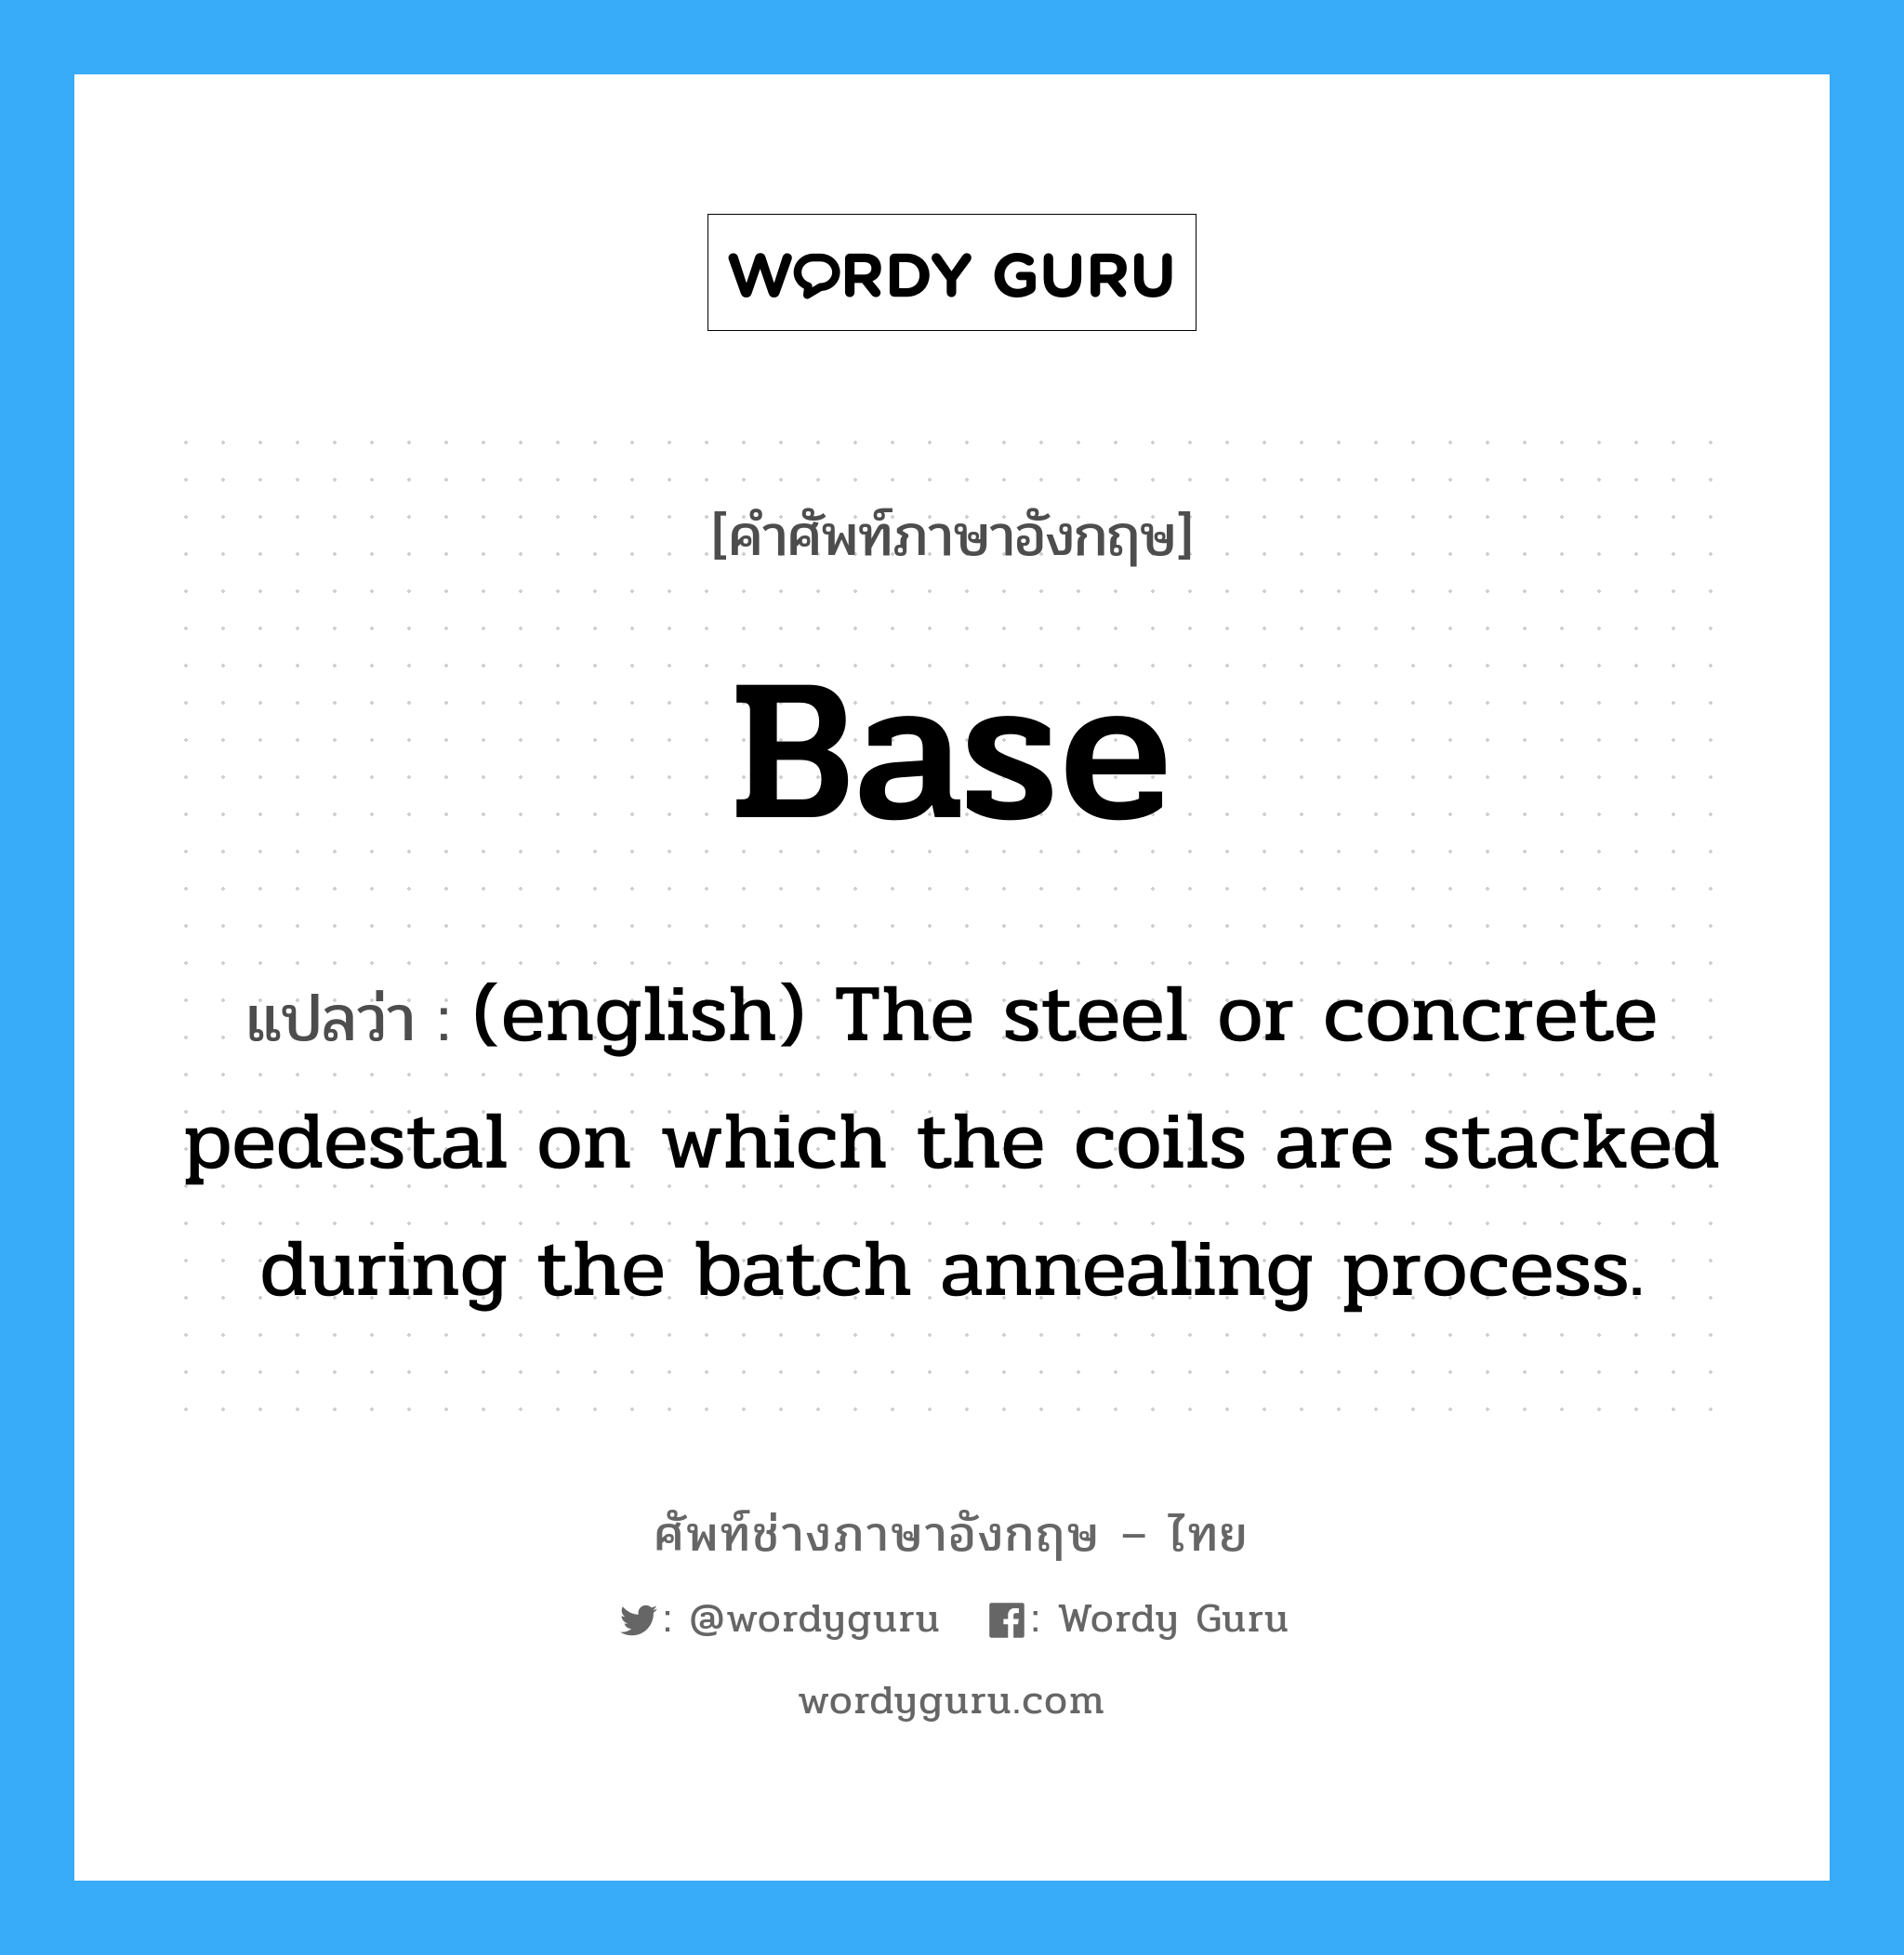 Base แปลว่า?, คำศัพท์ช่างภาษาอังกฤษ - ไทย Base คำศัพท์ภาษาอังกฤษ Base แปลว่า (english) The steel or concrete pedestal on which the coils are stacked during the batch annealing process.